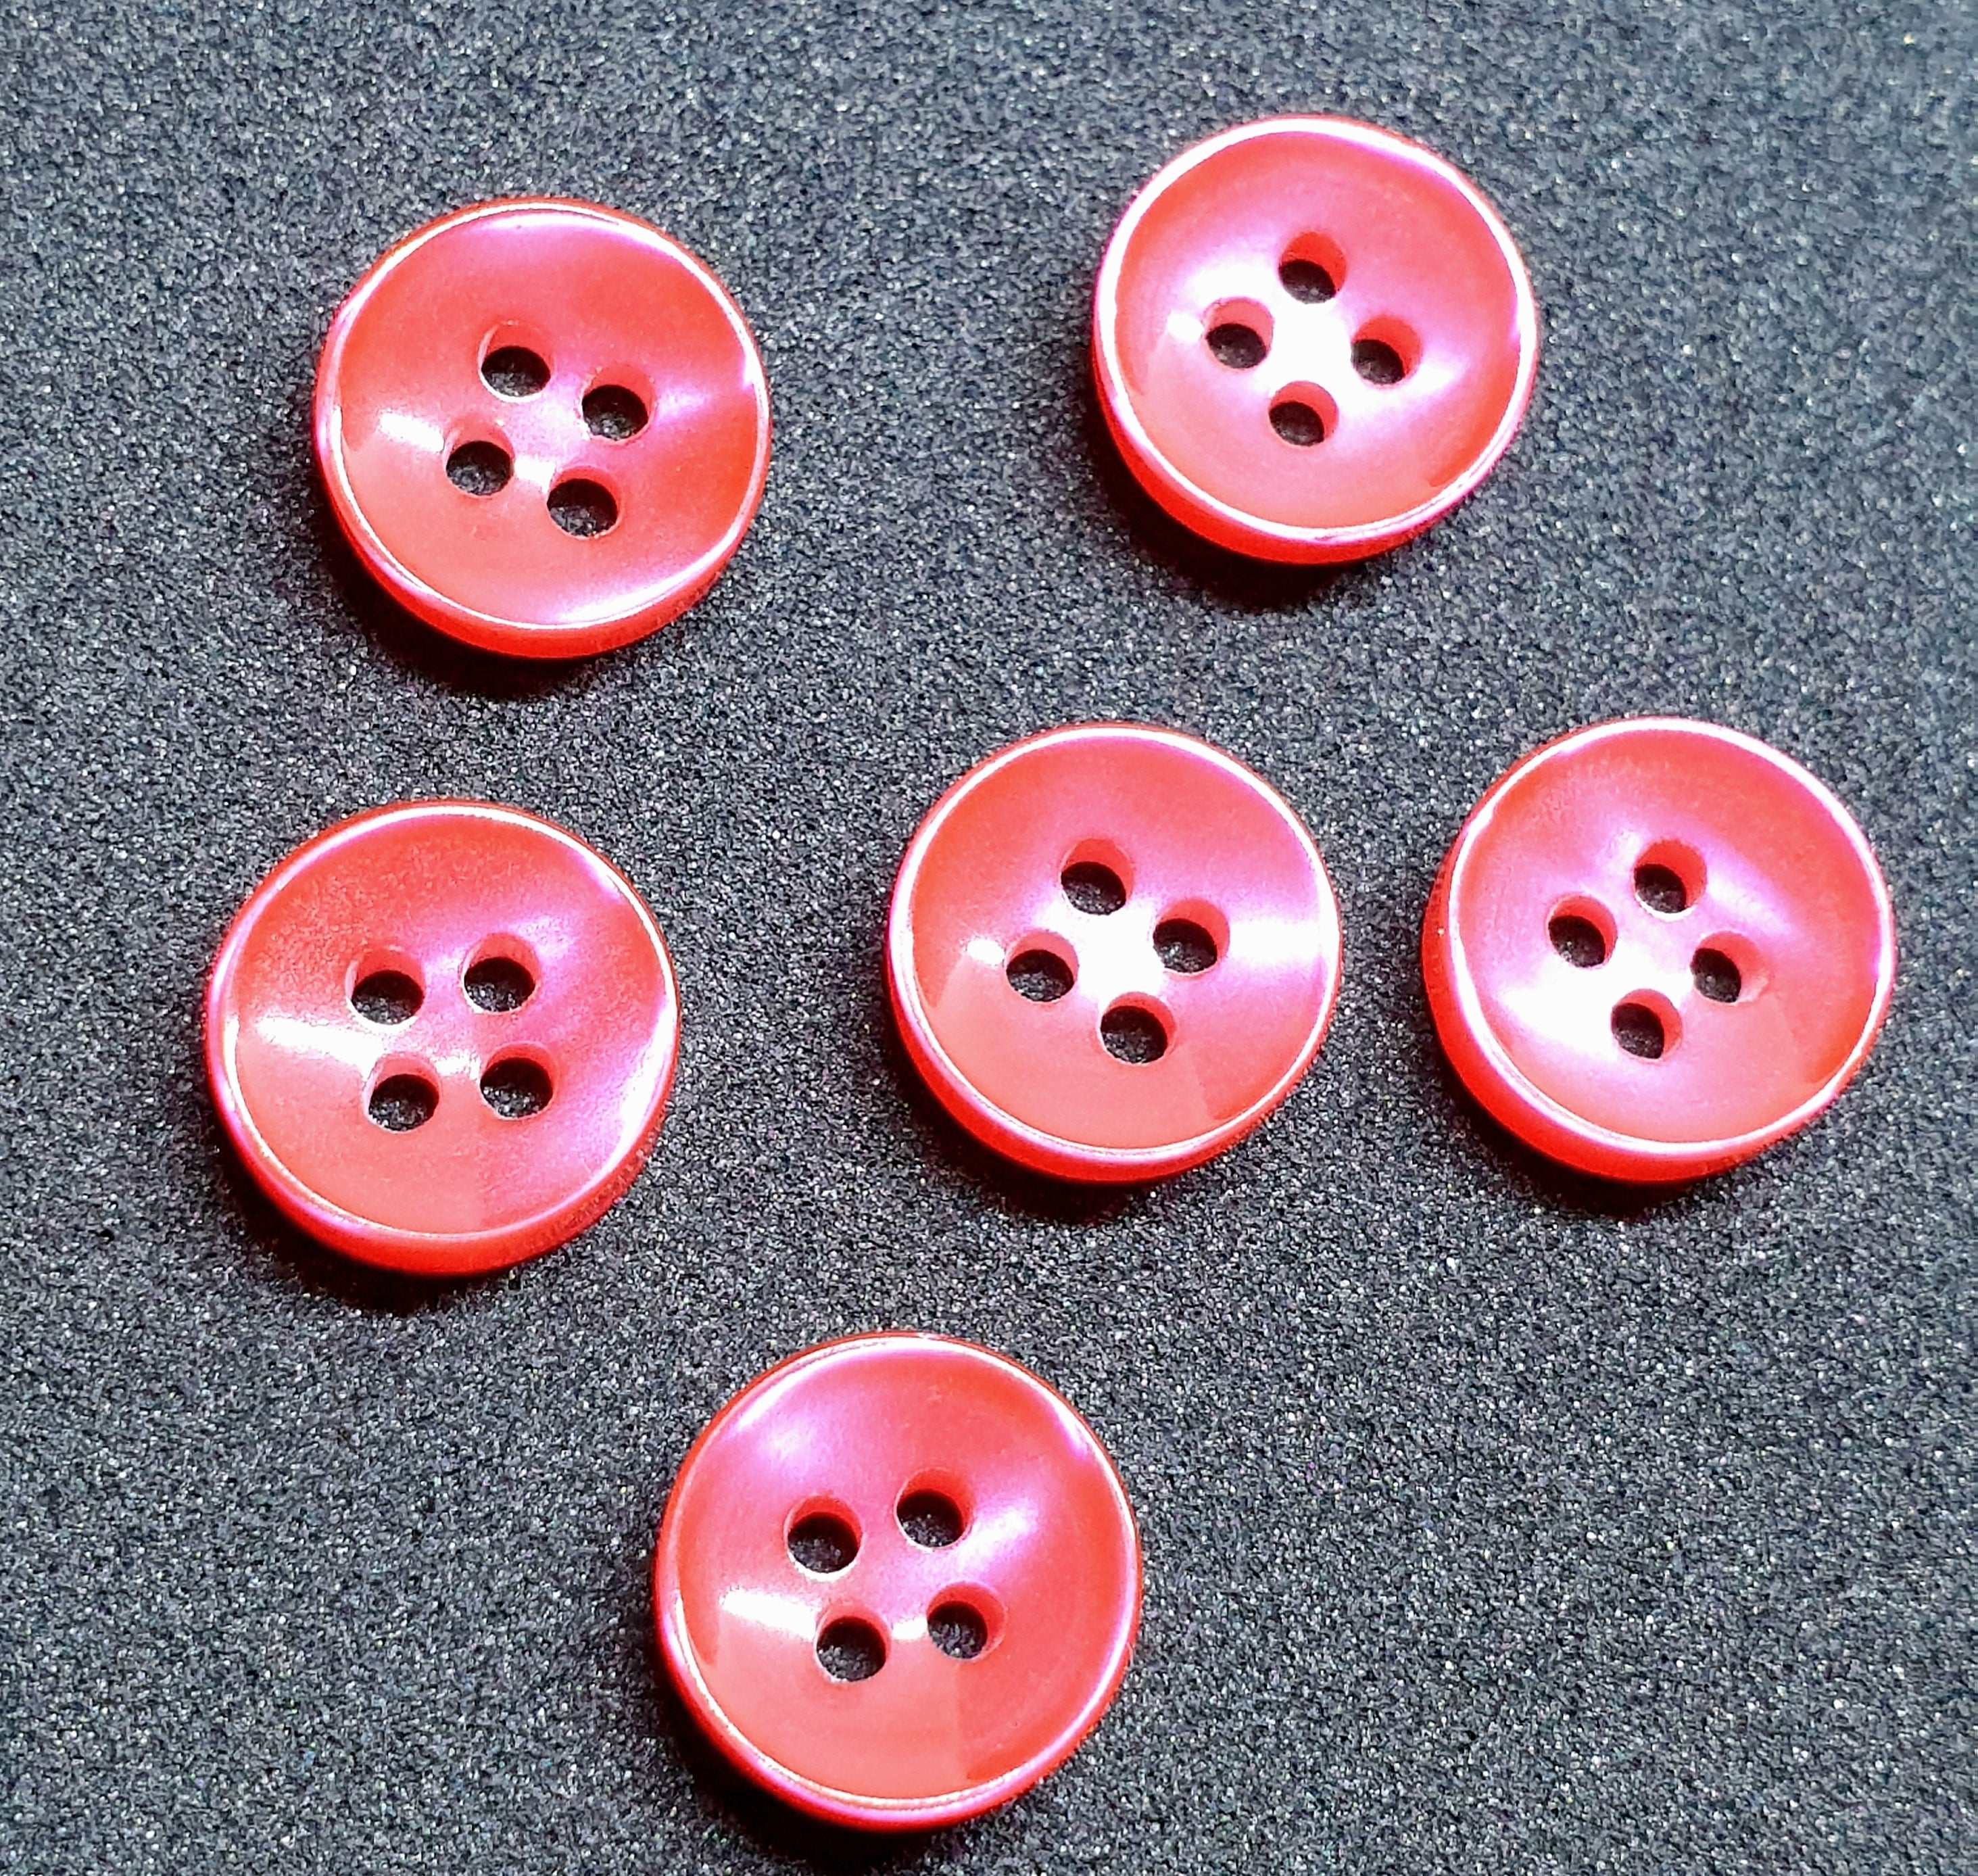 MajorCrafts 80pcs 11.5mm Rose Red Pearlescent 4 Holes High-Grade Round Resin Small Sewing Buttons